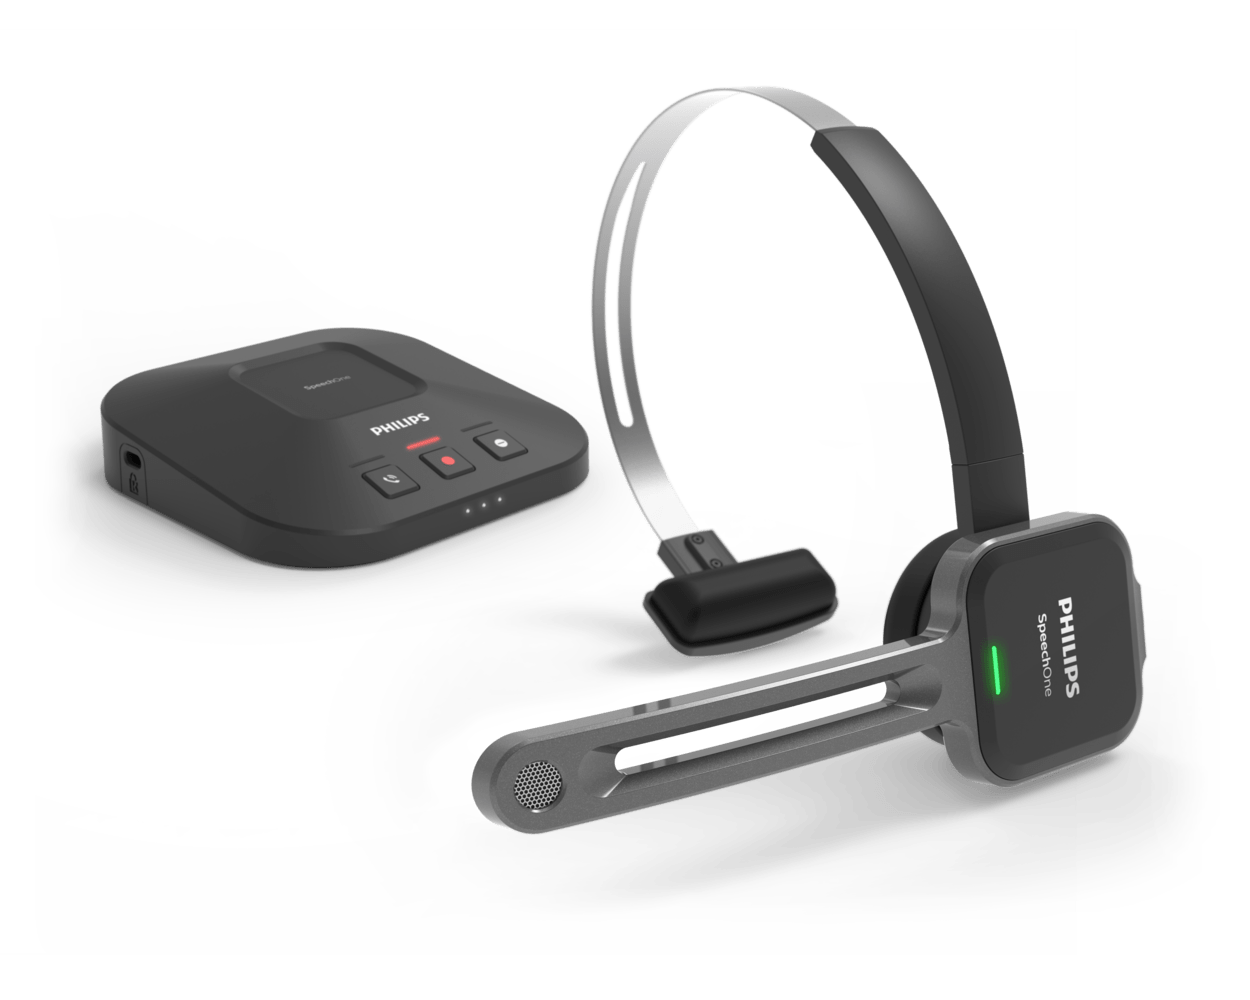 Philips speech one wireless headset is a great option for all three products